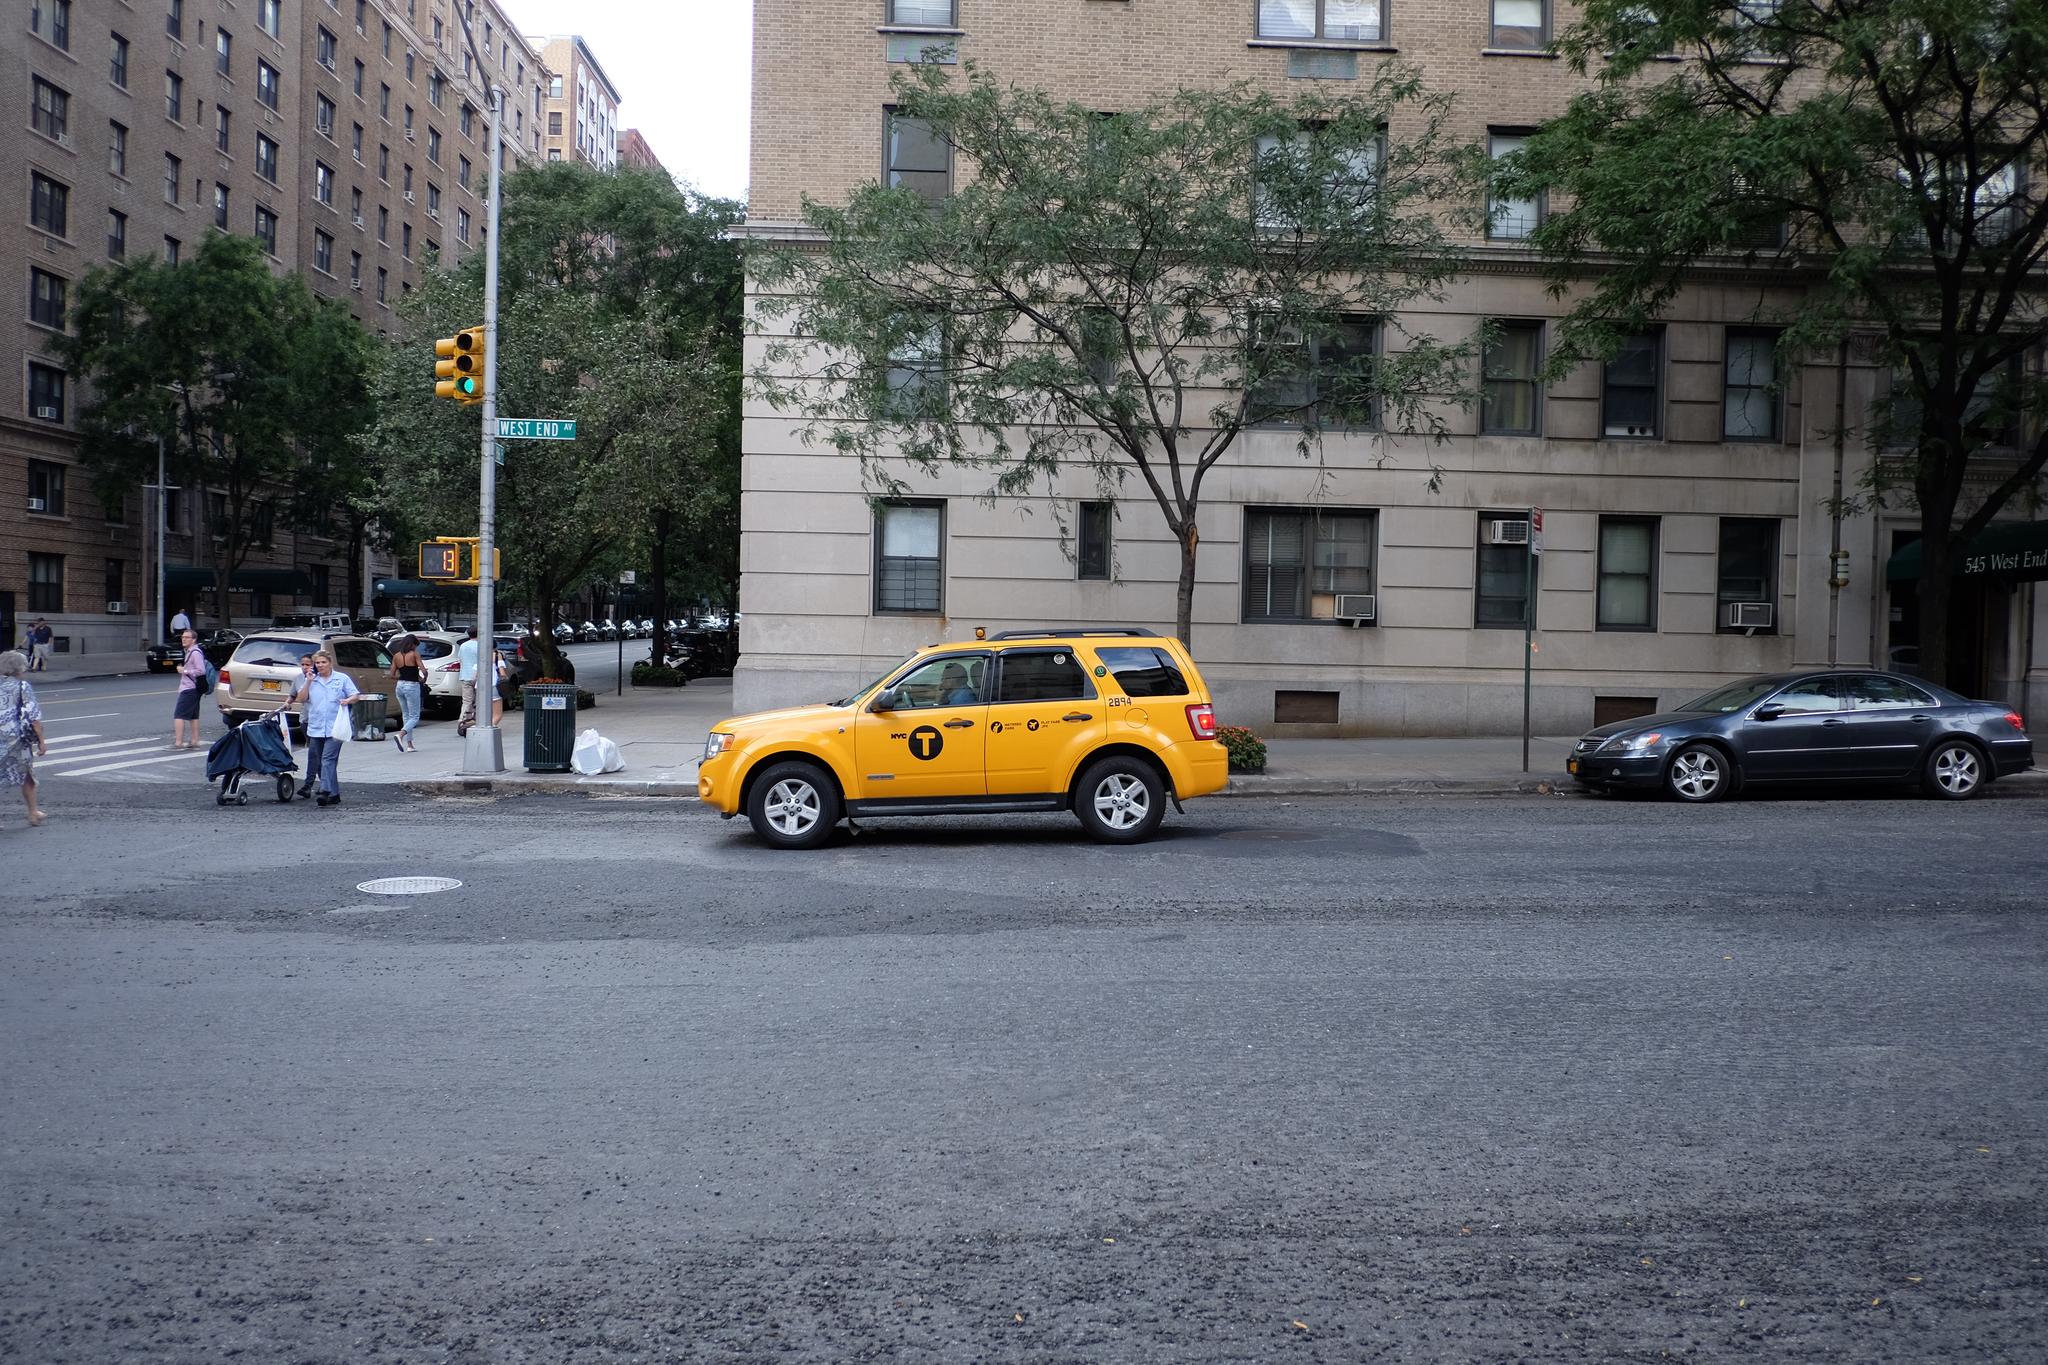 A yellow taxi is parked on a city street near a beige building with several windows. Trees and other buildings are visible in the background, and a few pedestrians are walking on the sidewalk